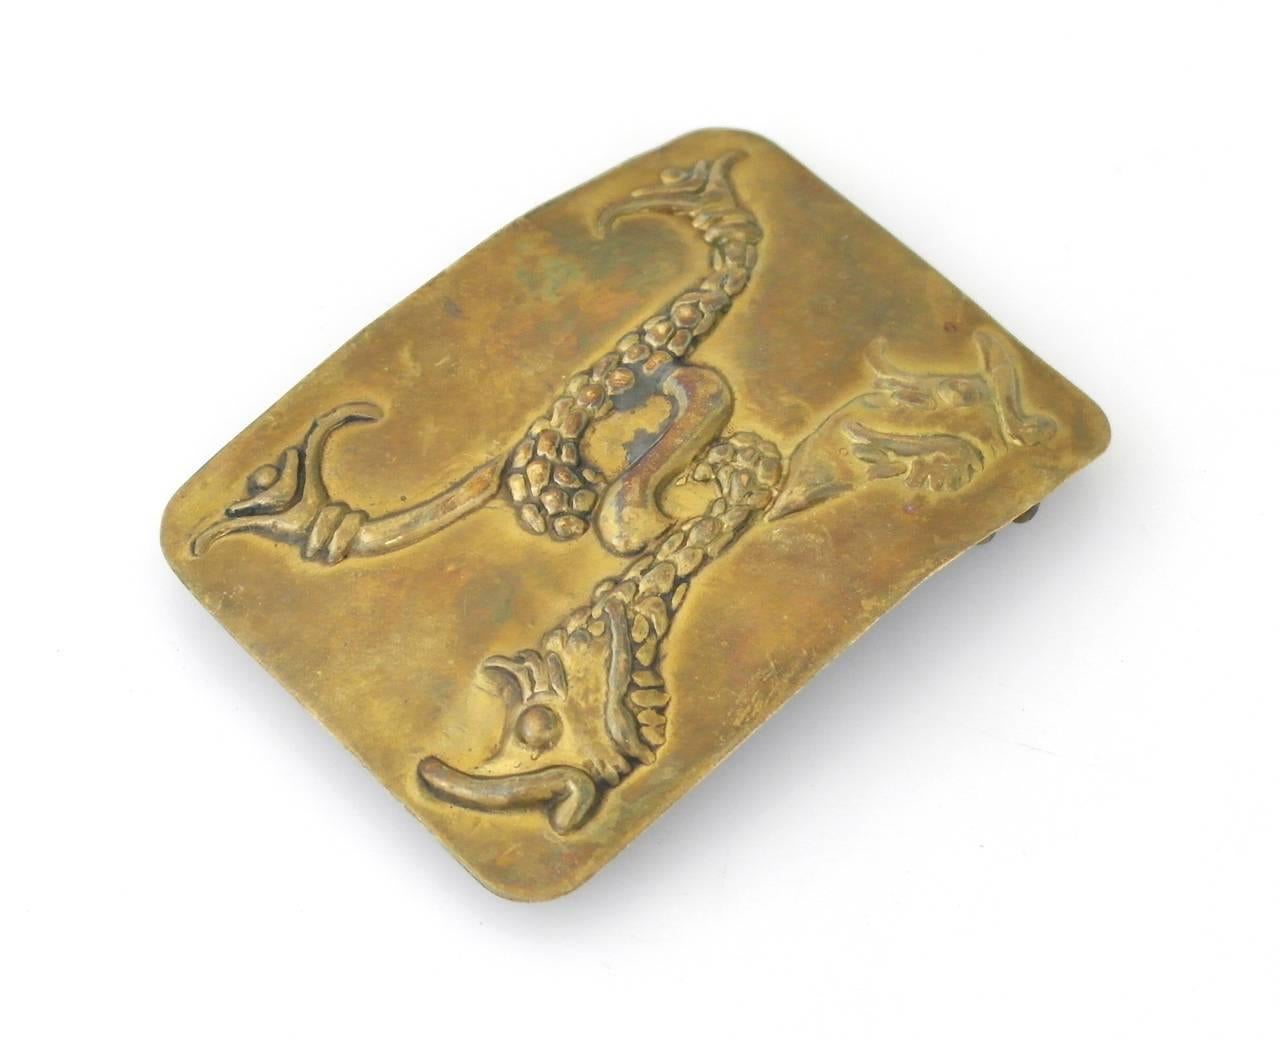 Offering a scarce brass belt buckle by Hubert Harmon of Taxco, Mexico. Made entirely of brass with embossed koi fish as the primary decorative element. Harmon only lived in Taxco a short while and was known for his whimsical design. His work is